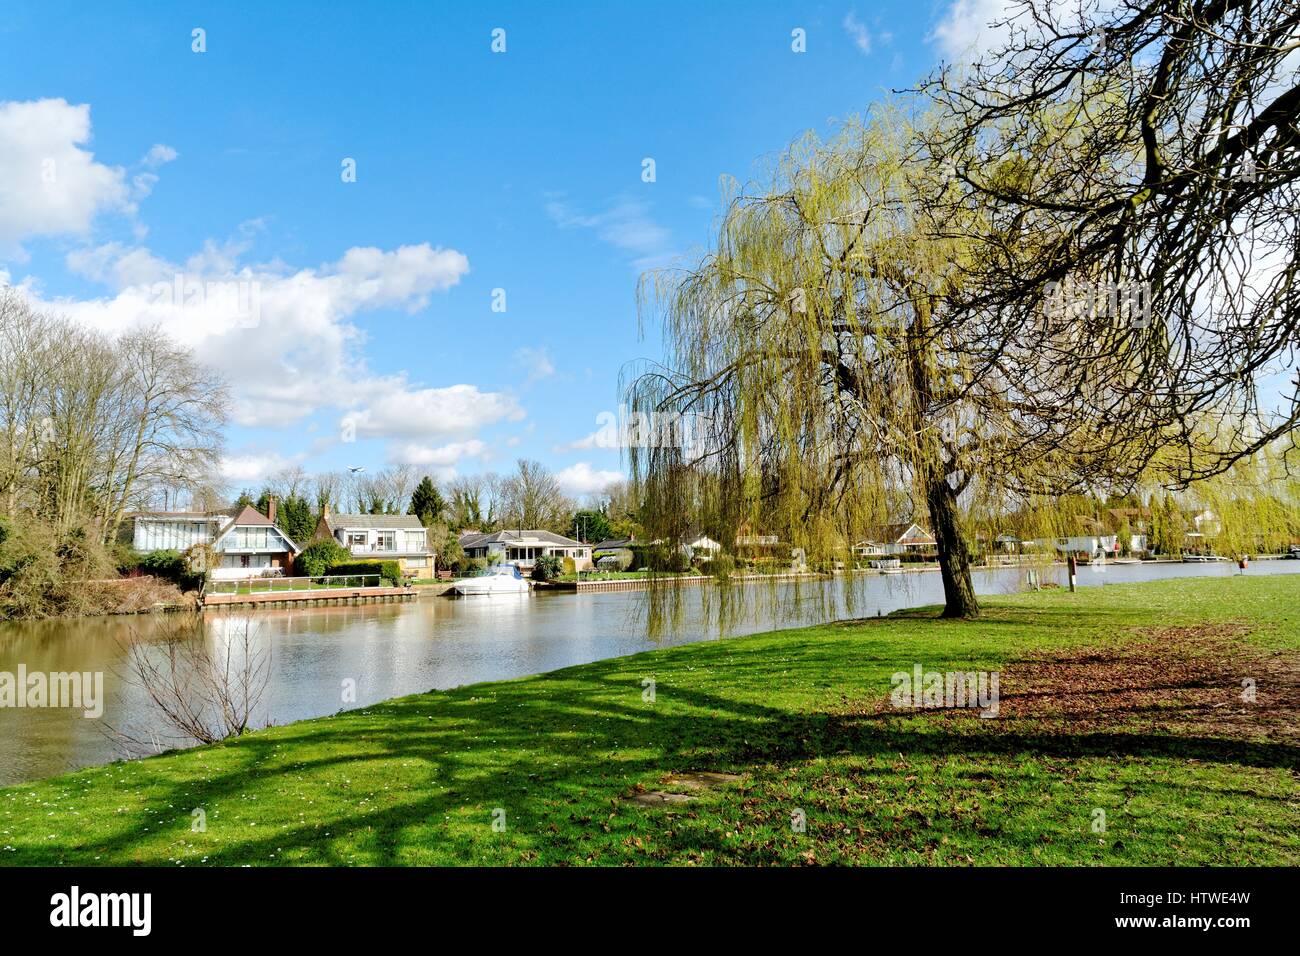 Runnymede Pleasure Ground by the River Thames Surrey UK Stock Photo